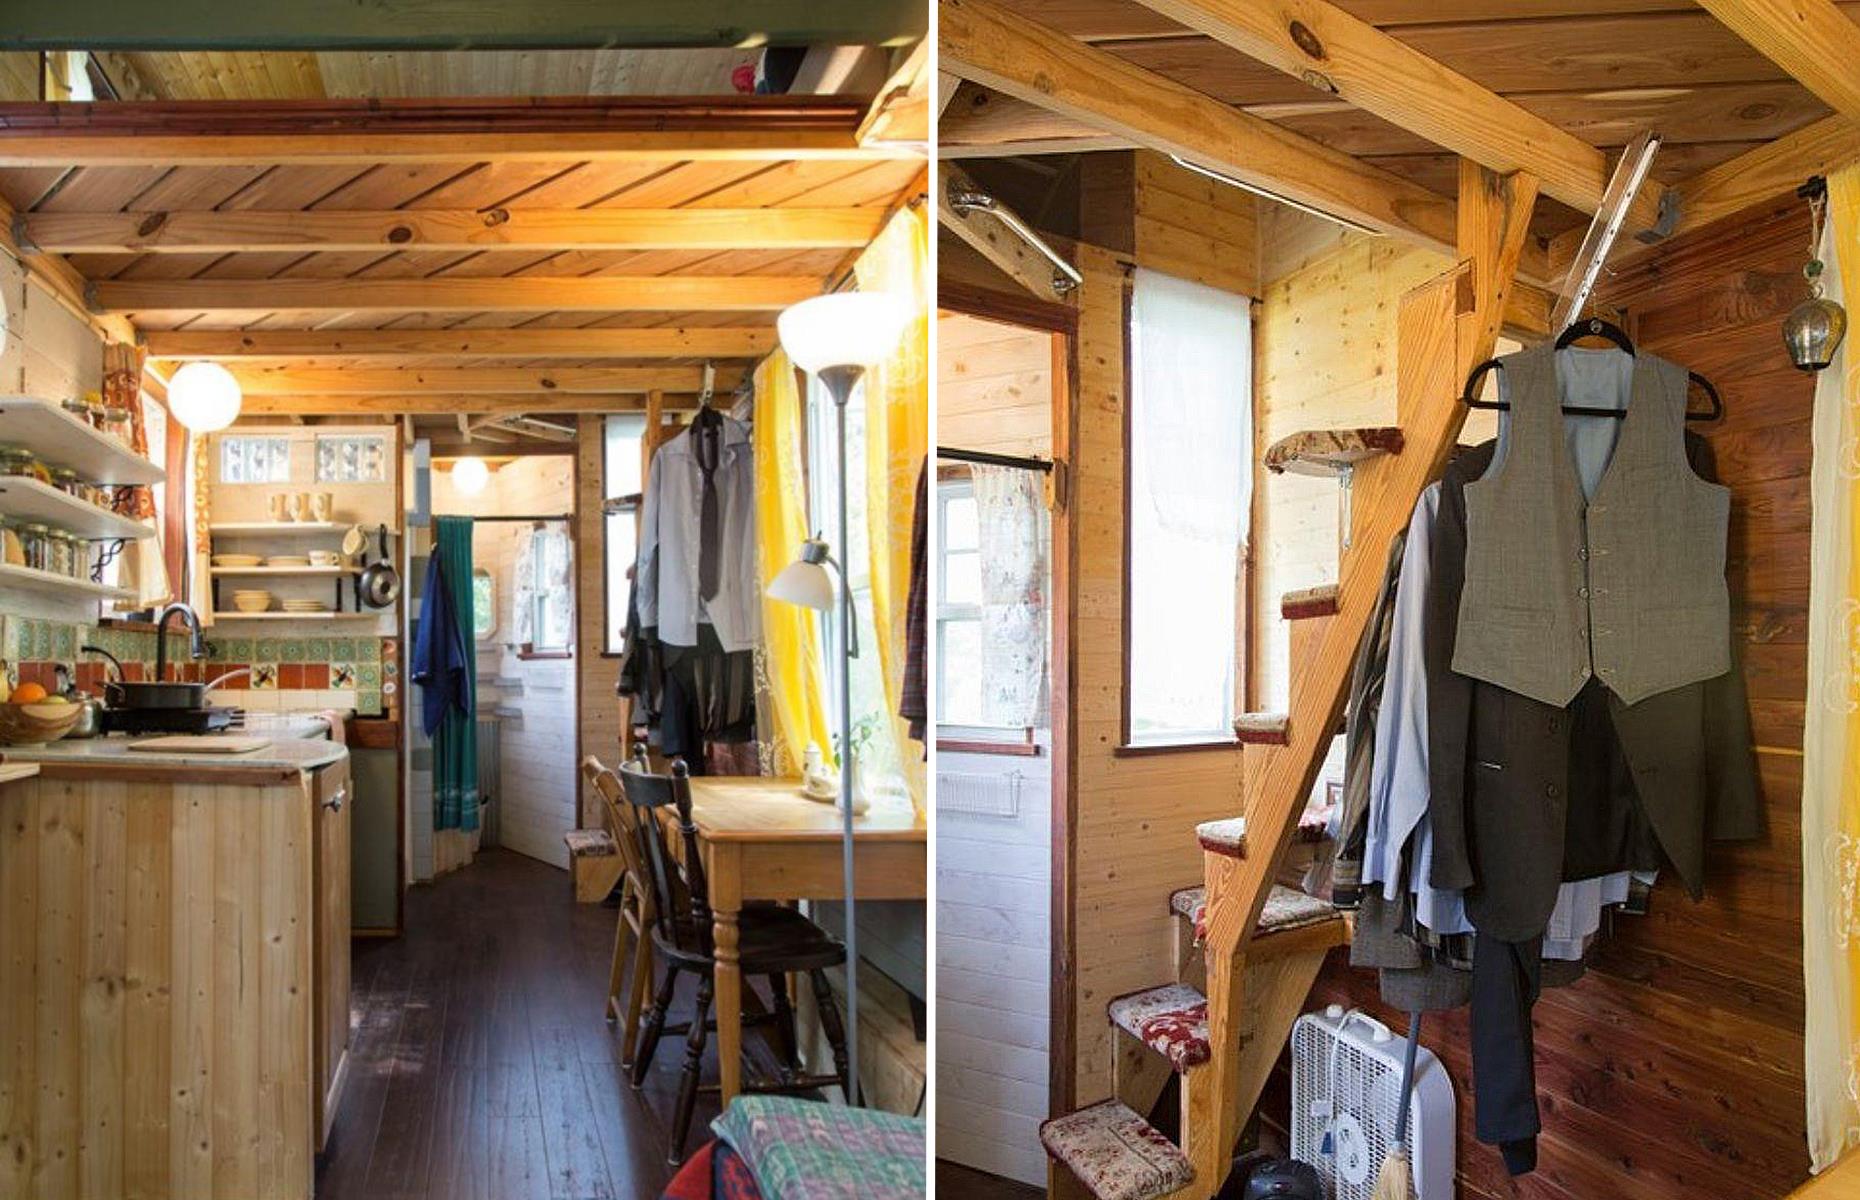 <p>The frame of the home was created from southern yellow pine and is naturally insulated with sheep's wool. Even the furniture in this tiny home has a vintage vibe, adding to its laid-back, rustic appearance.</p>  <p><strong>Liked this? Click on the Follow button above for more great stories from loveEXPLORING</strong></p>